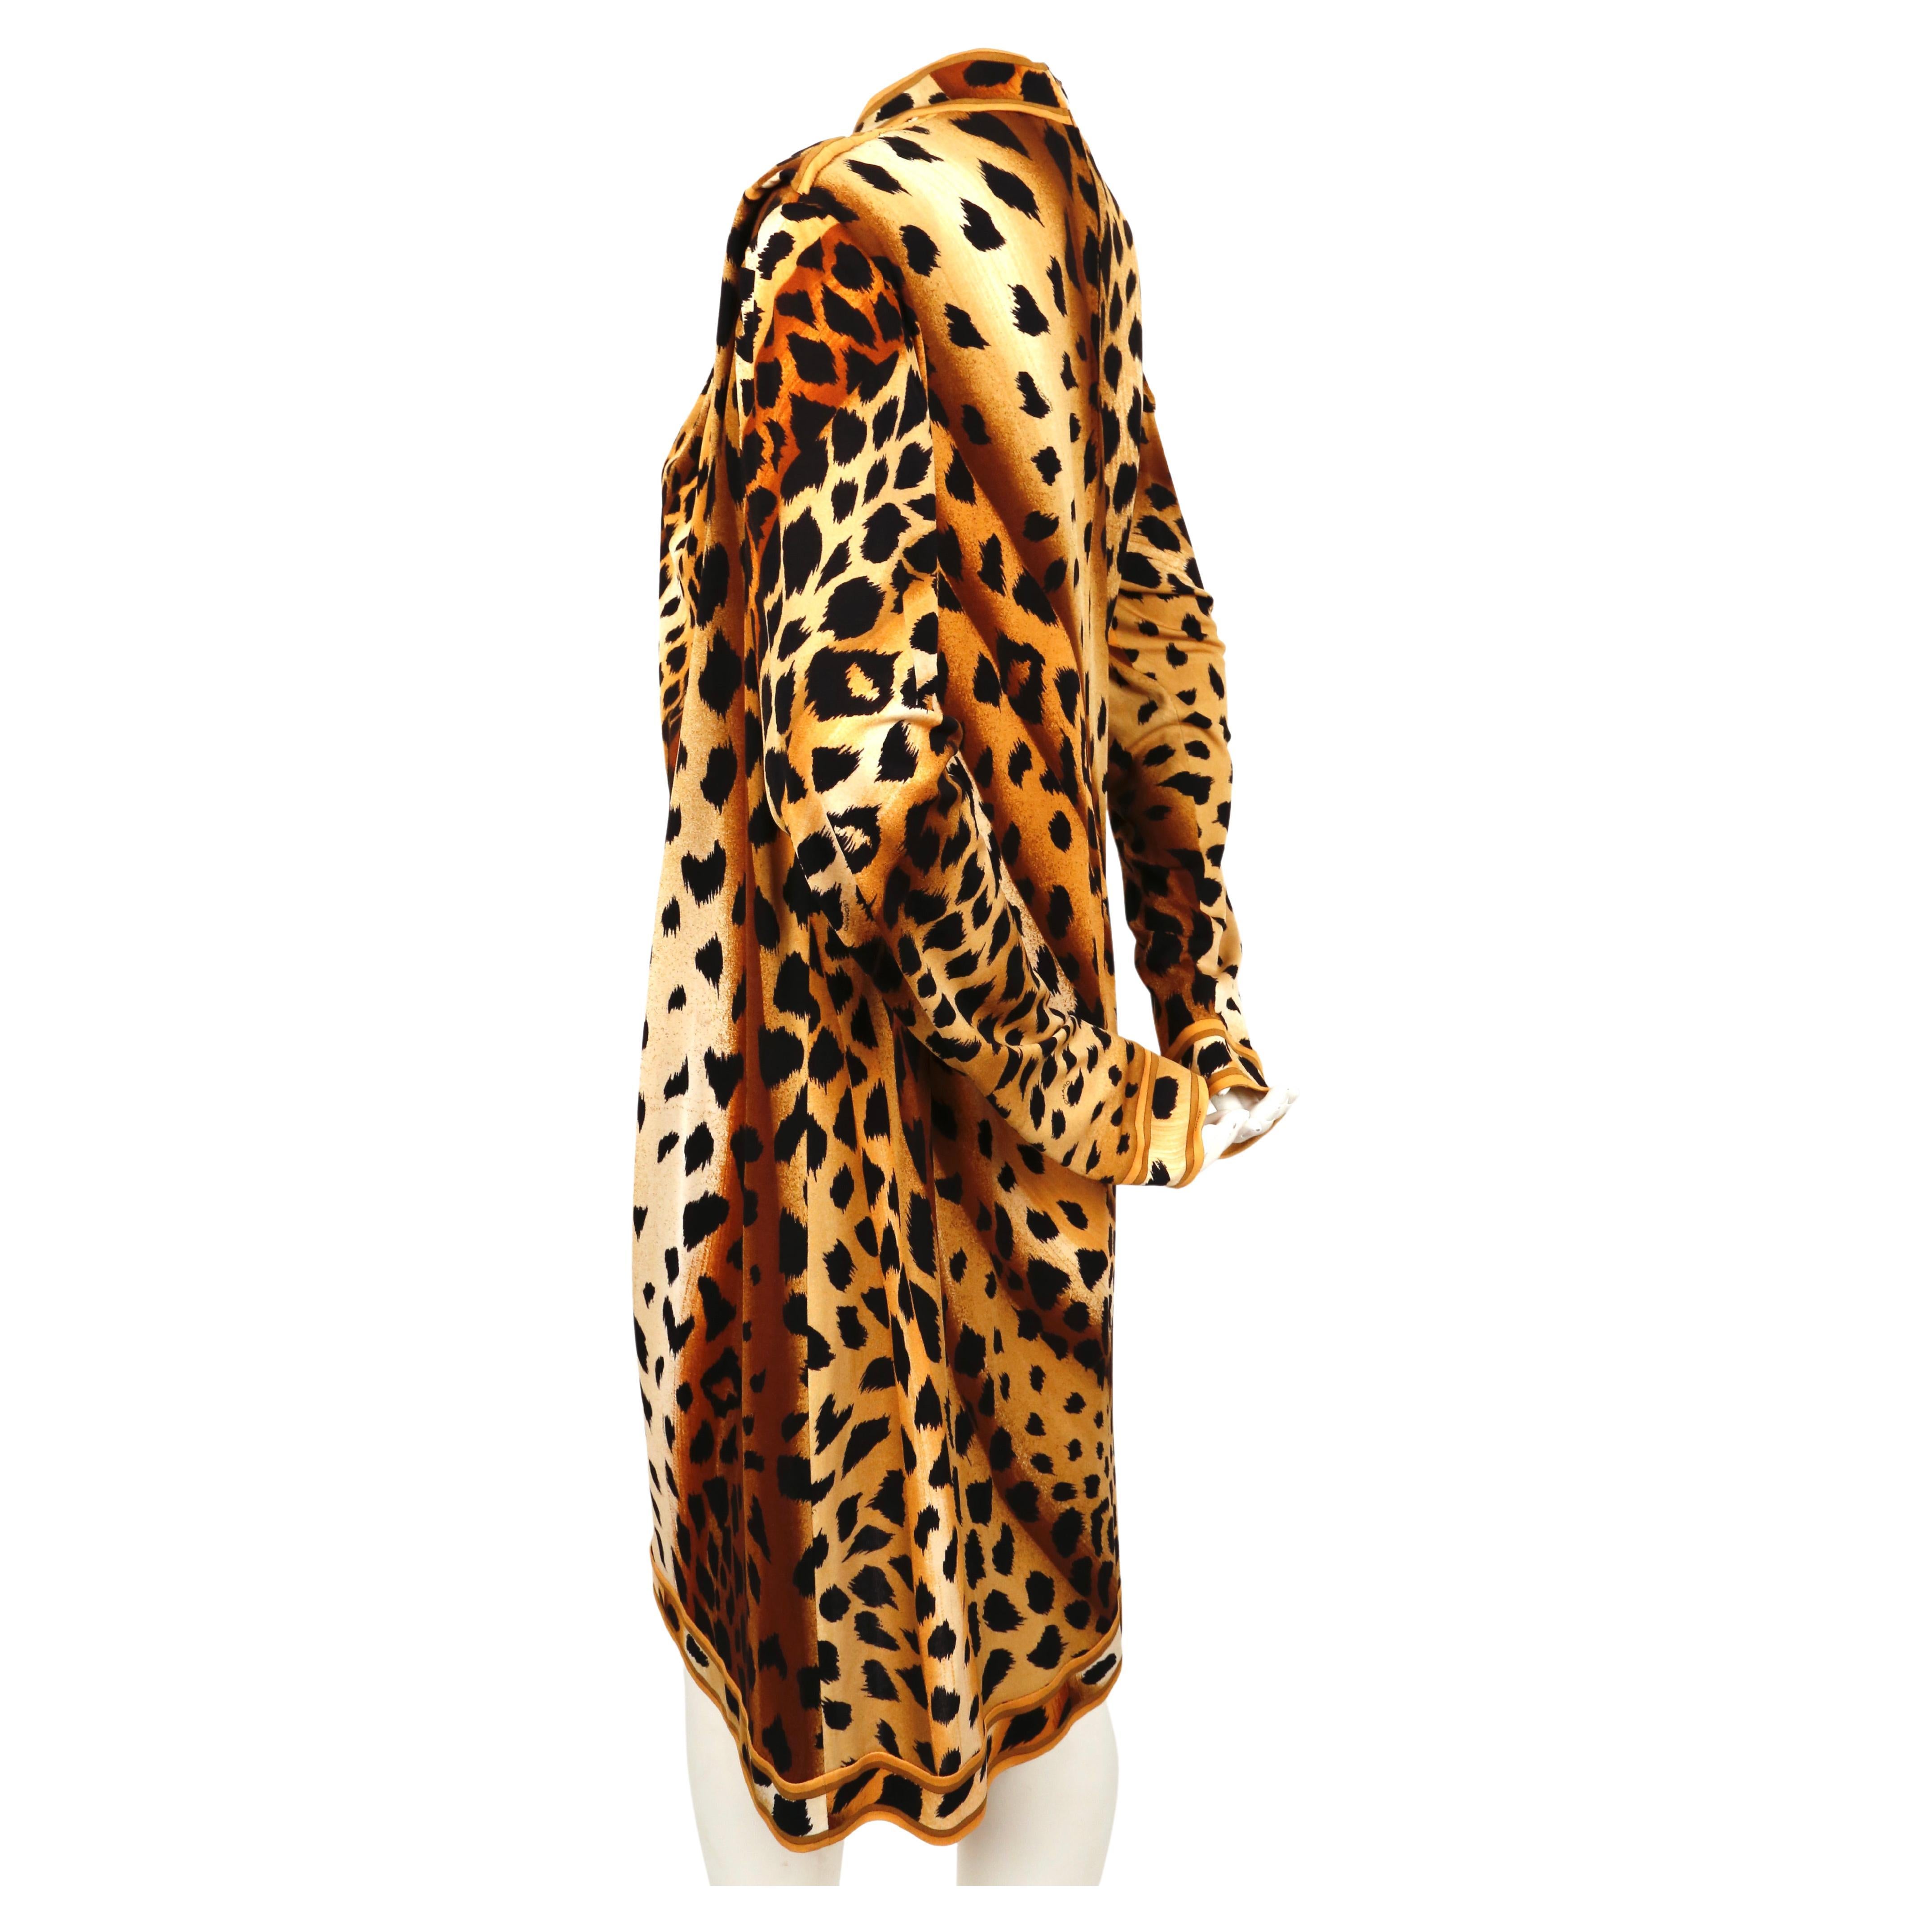 Vivid, leopard-printed, silk-jersey dress with draped cut designed by Leonard dating to the 1990's. No size is indicated however this would best fit a US 8-10. Approximate measurements: shoulder 19